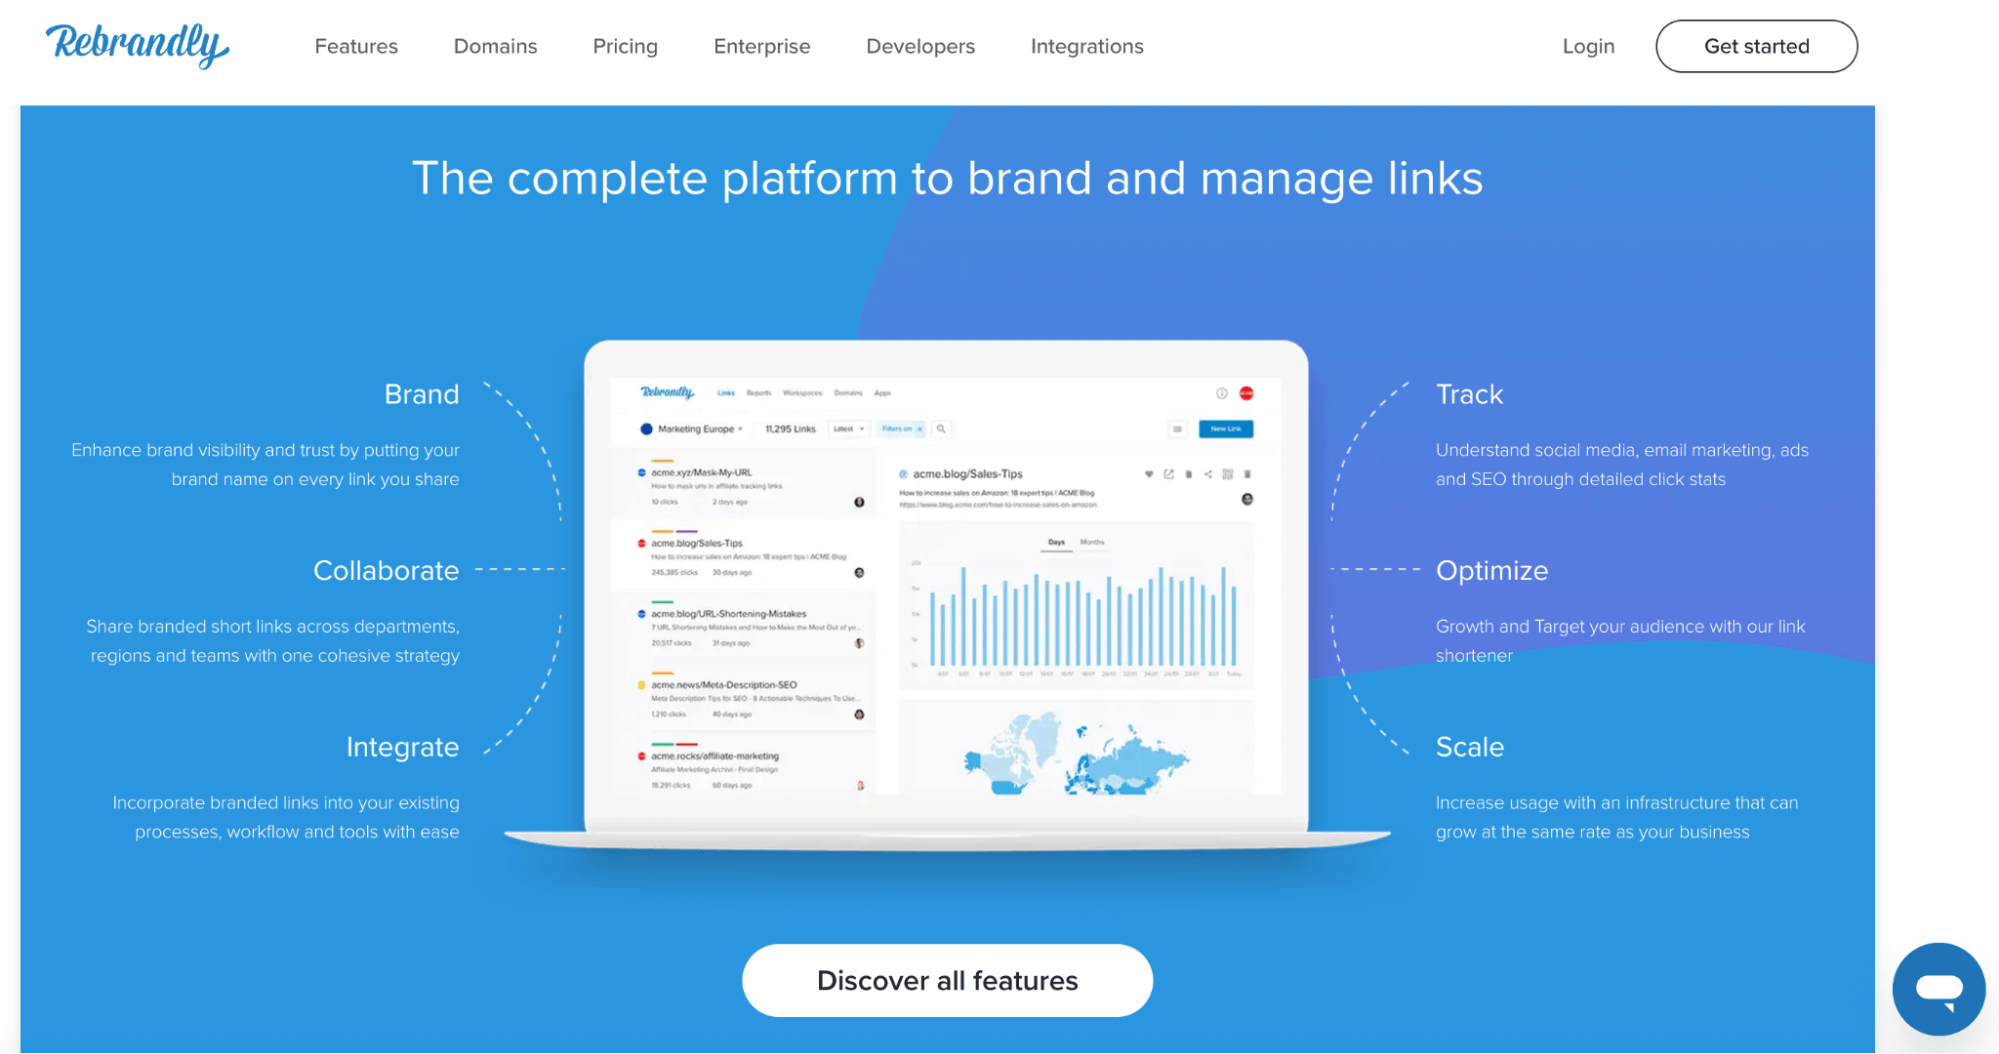 The image displays Rebrandly’s homepage stating, “The complete platform to brand and manage links”. The middle of the screen shows a computer screen with link-tracking tools surrounded by aspects of digital marketing like branding, collaborating, integrating, tracking, optimizing, and scaling.